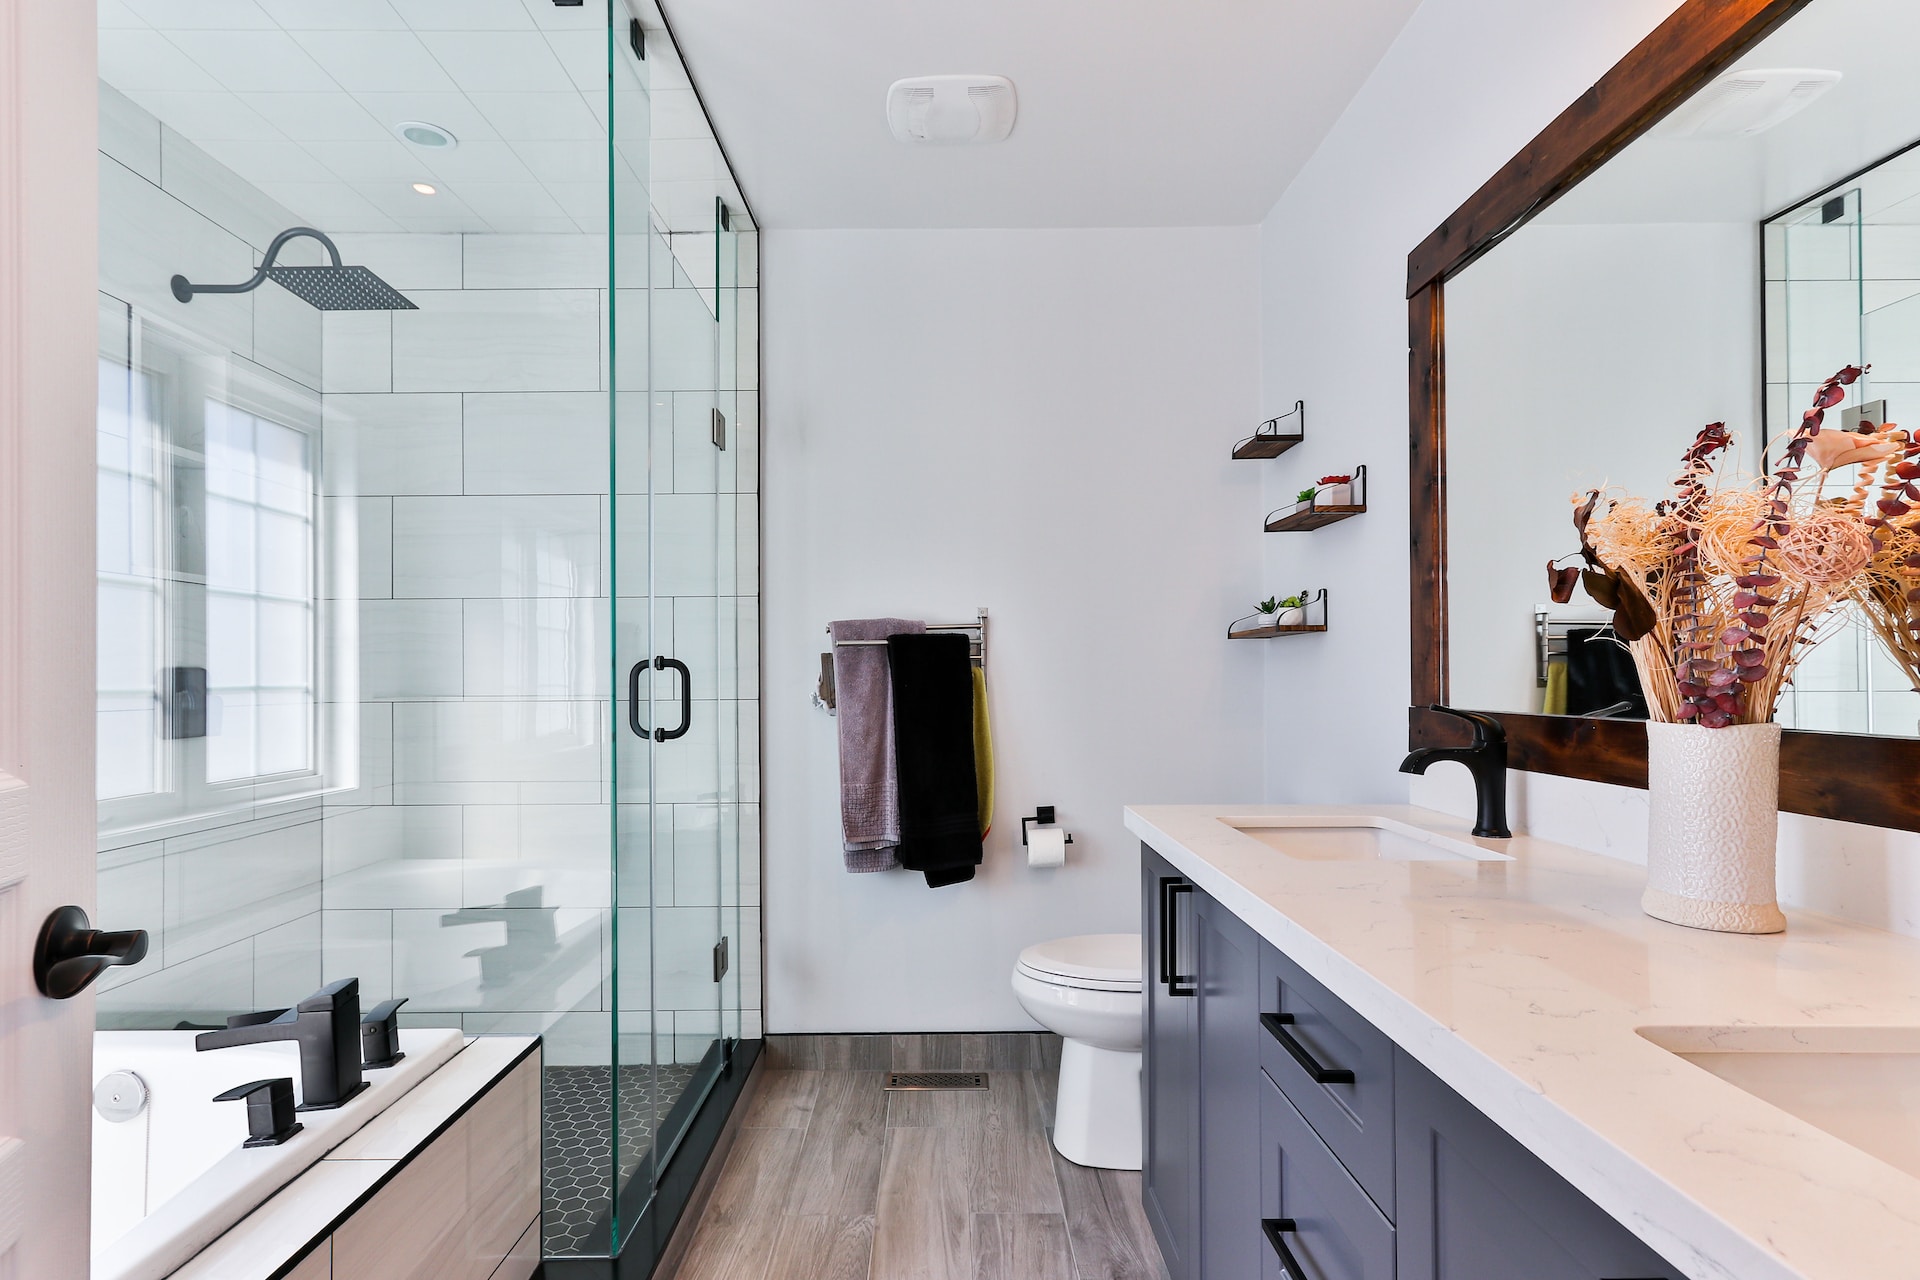 Bathroom Remodeling Trends and Ideas